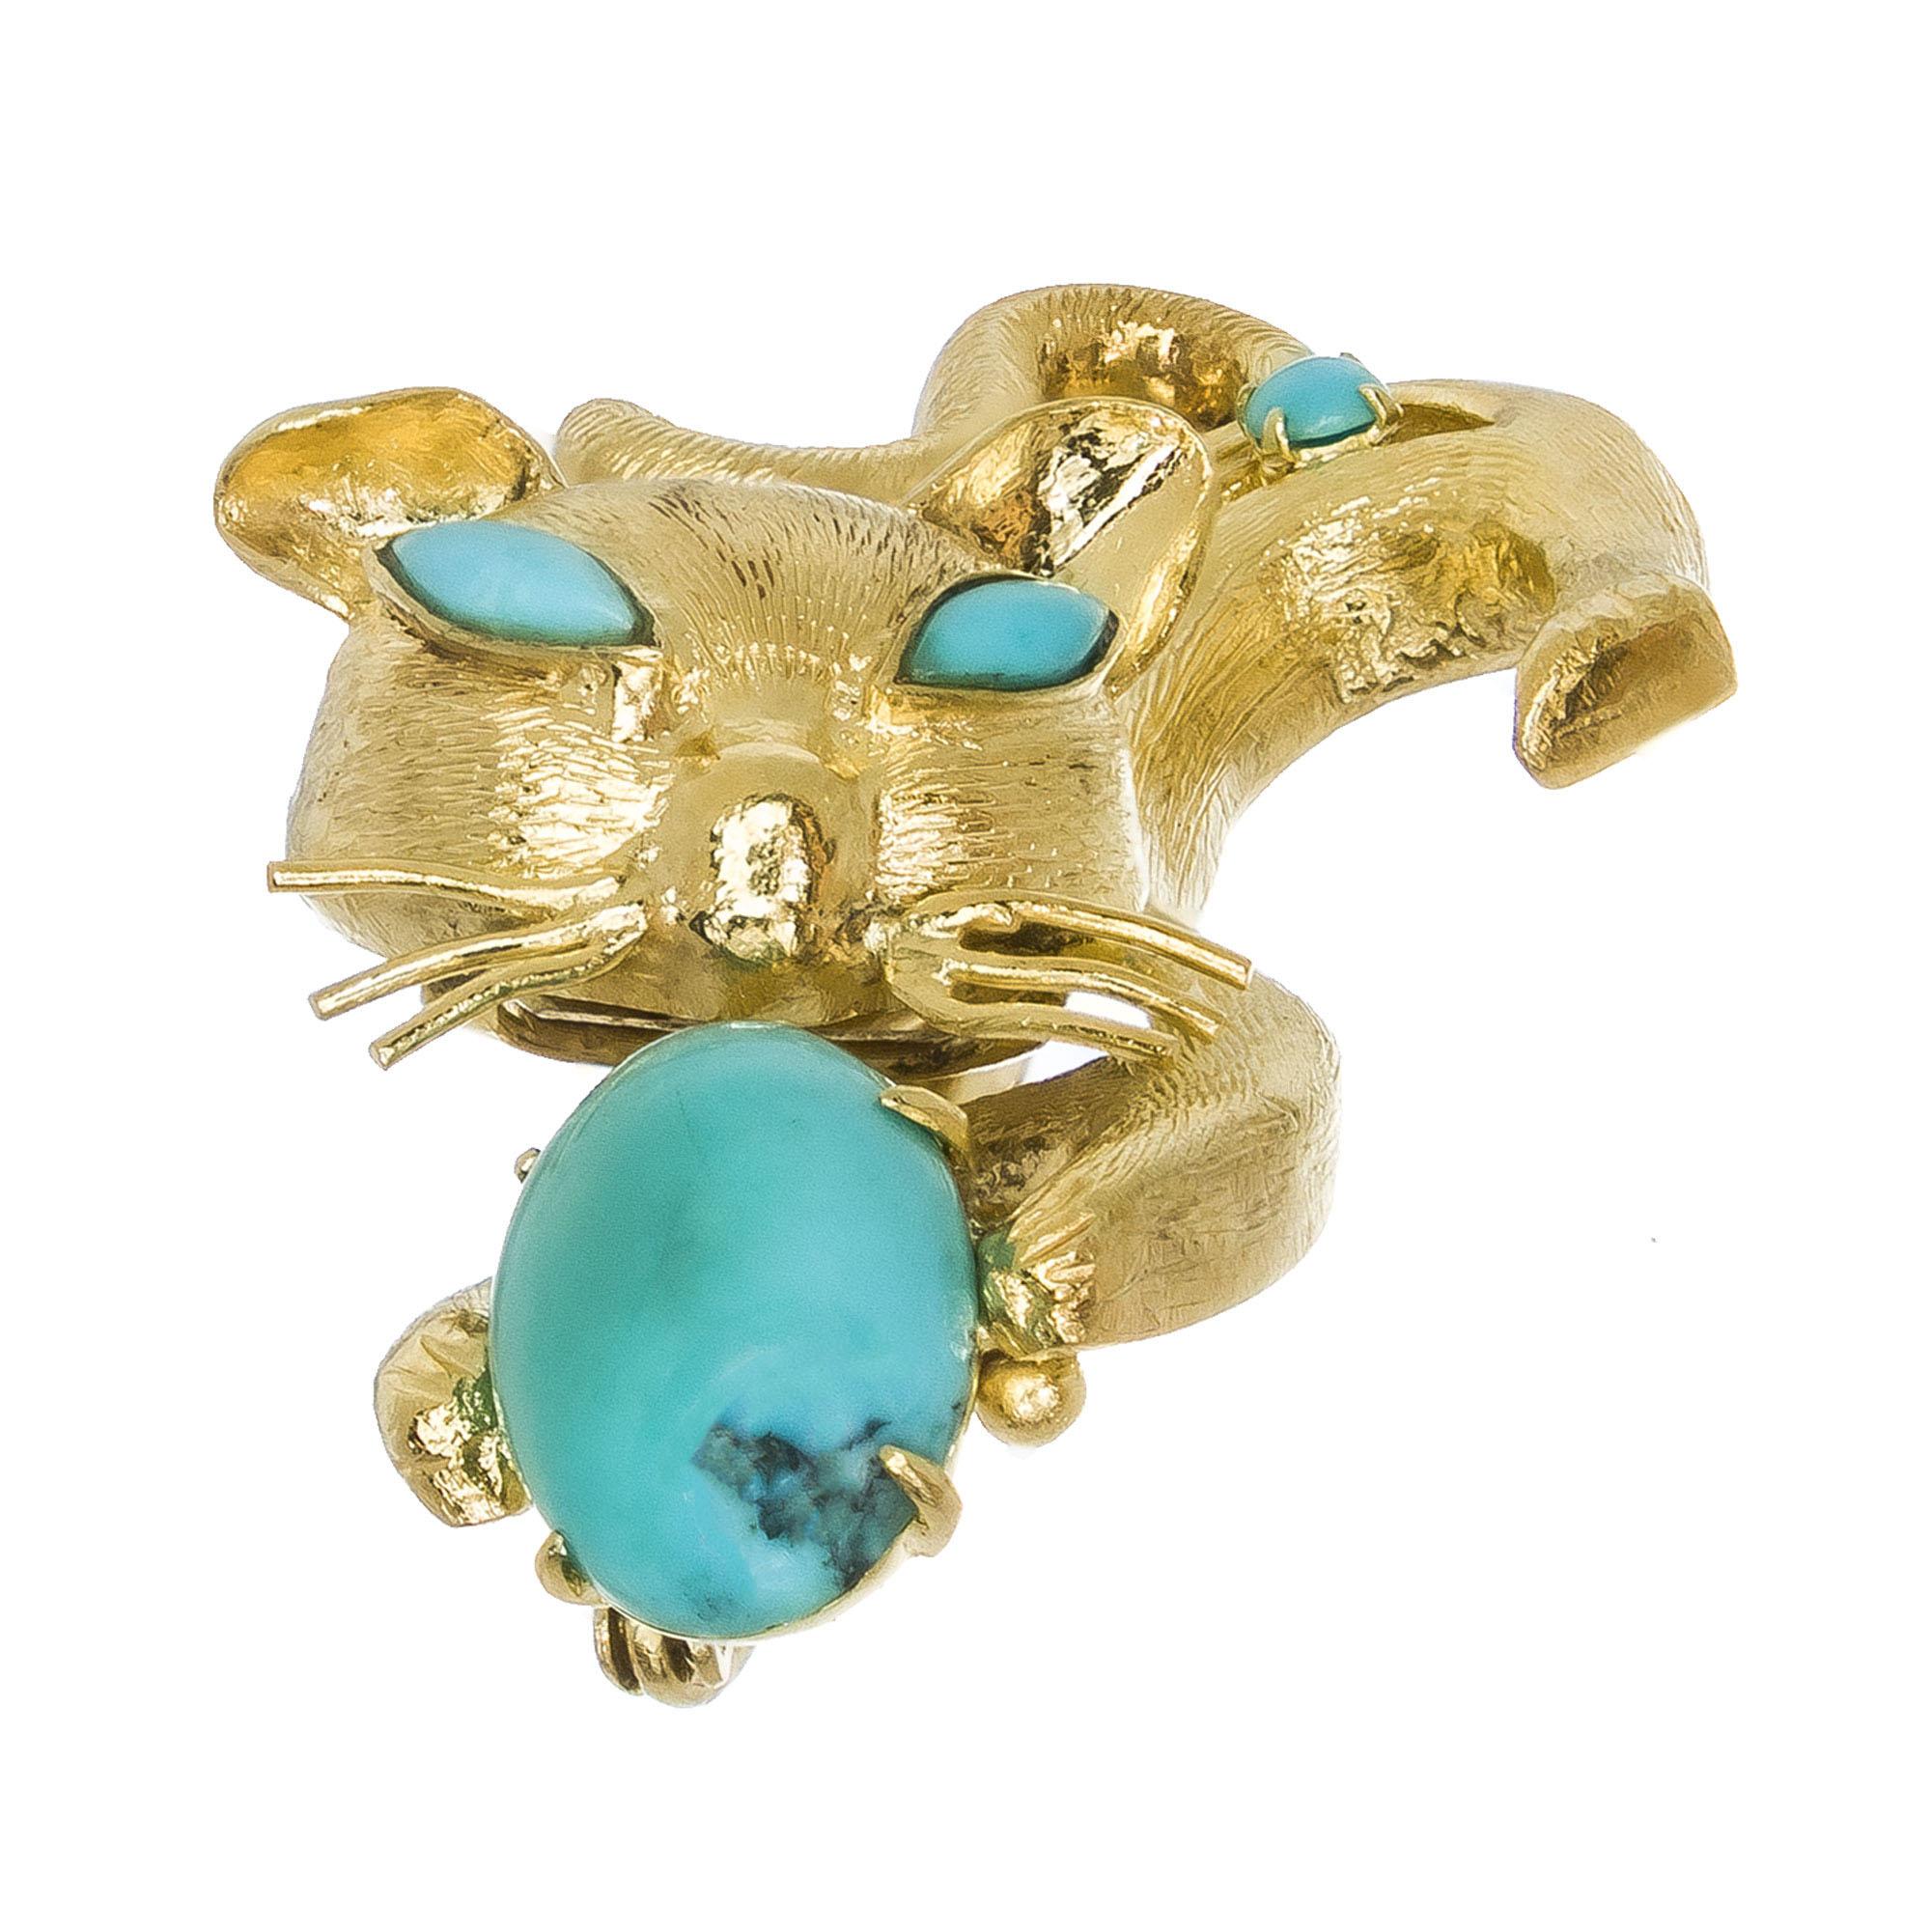 1960’s 18k yellow gold cat brooch with natural round, oval and marquise cut Persian turquoise 18k yellow textured gold.

1 oval blue turquoise, 9 x7mm
2 marquise blue turquoise, 4 x 2mm
6 round blue turquoise, 2.4mm
18k yellow gold
Stamped: 18k
7.6